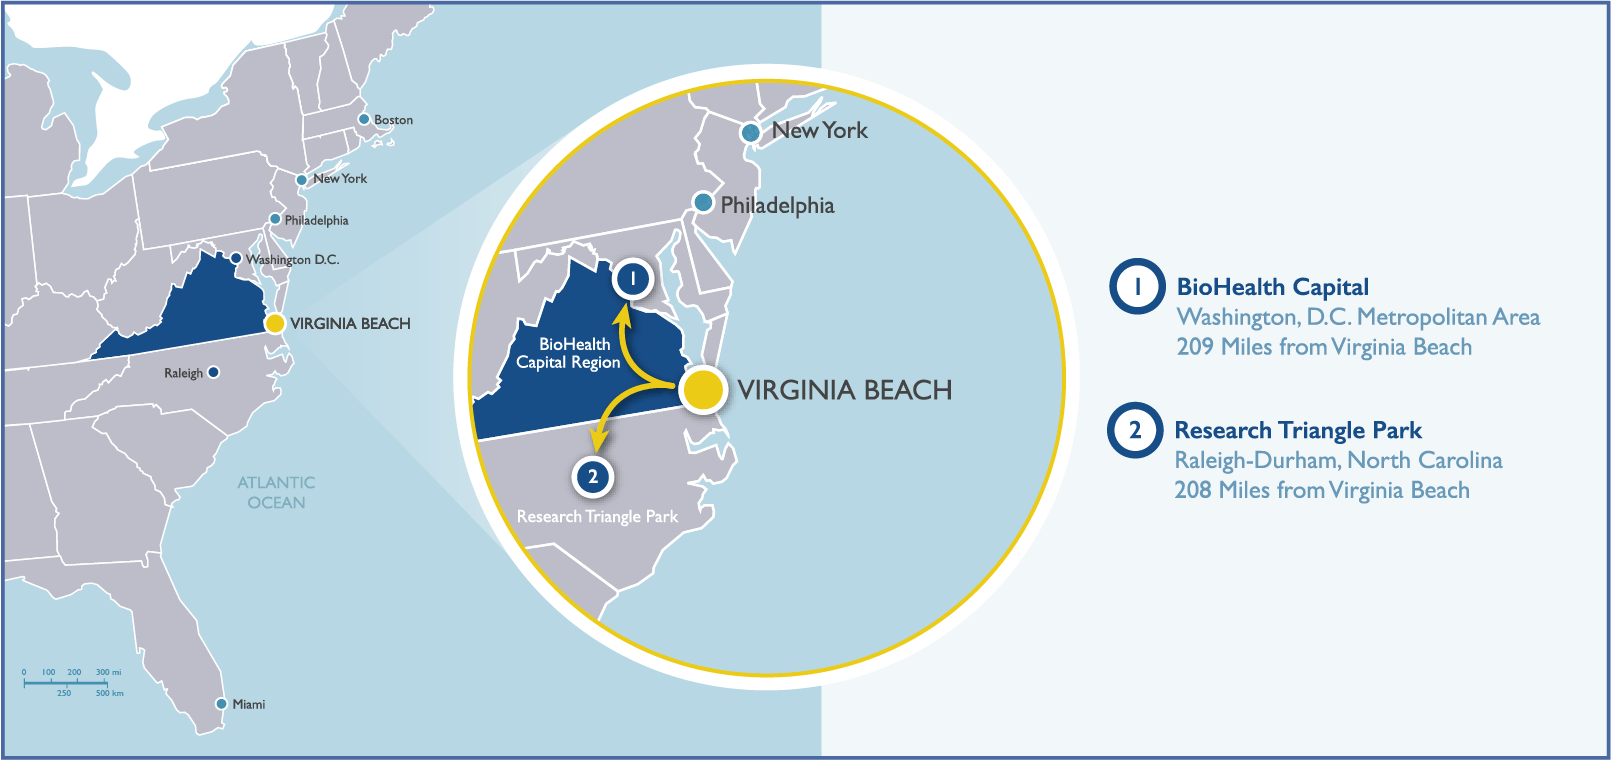 Location map: The City of Virginia Beach is situated between two major life science clusters: the Research Triangle Park of North Carolina and the BioHealth Capital Region